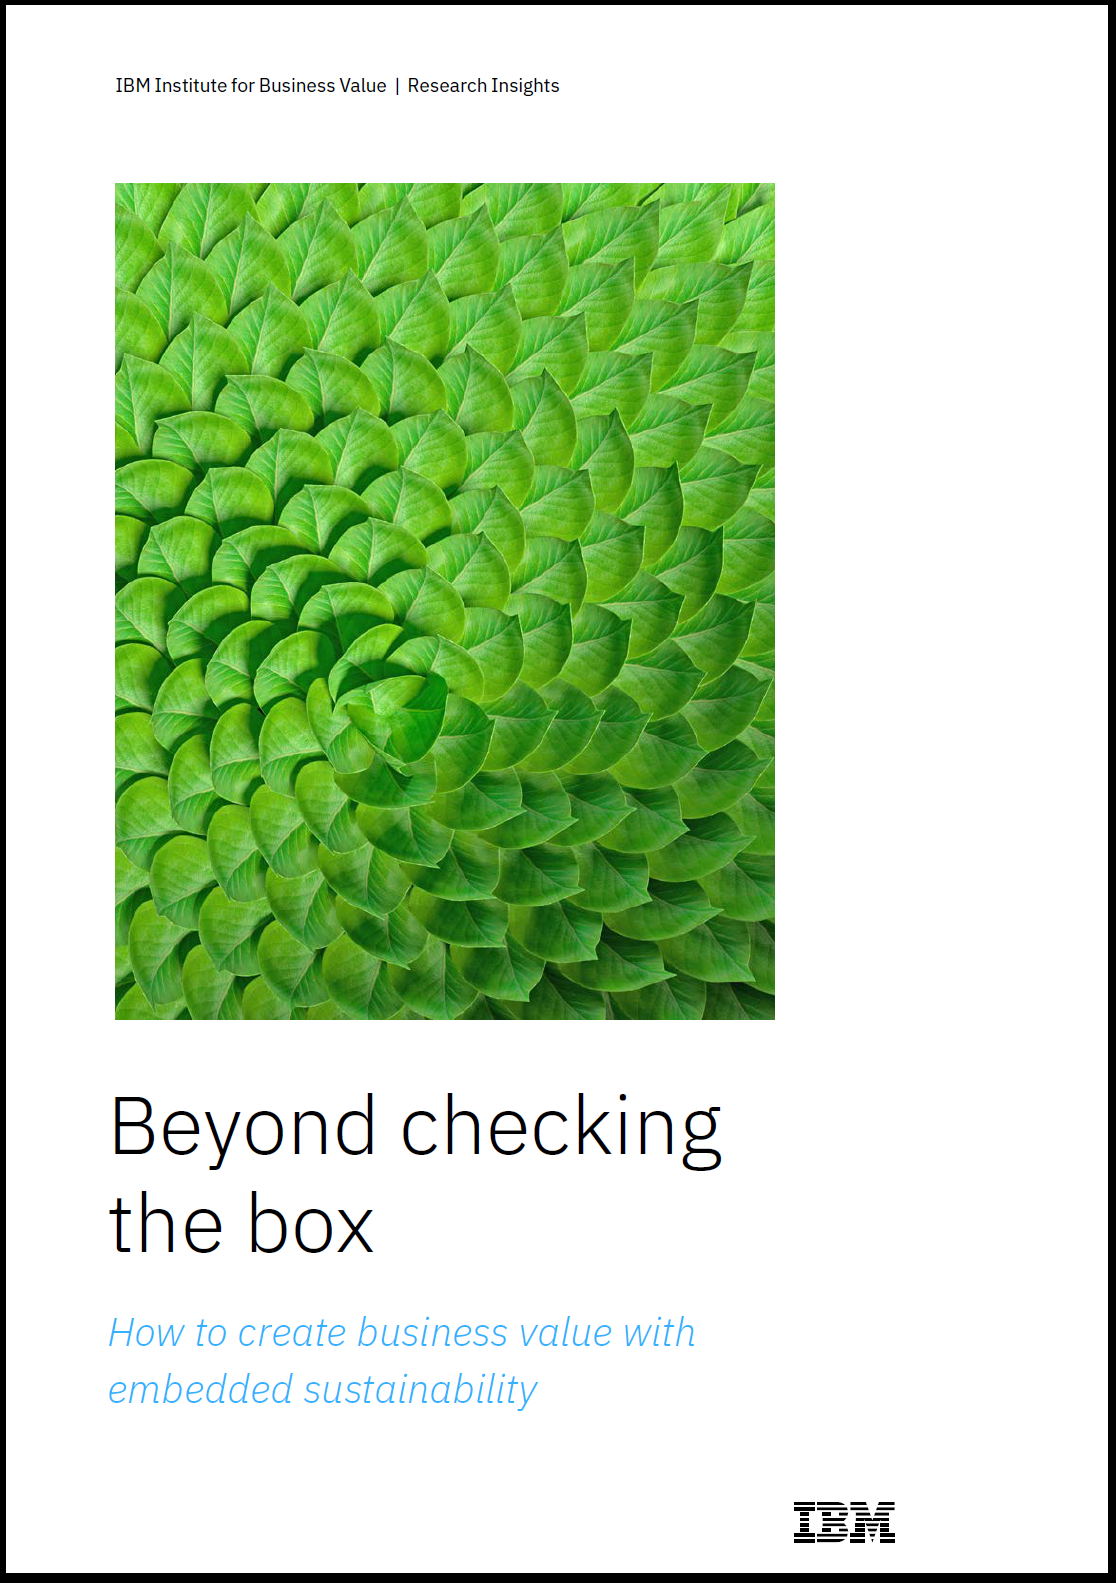 Beyond Checking the Box – How to Create Business Value with Embedded Sustainability